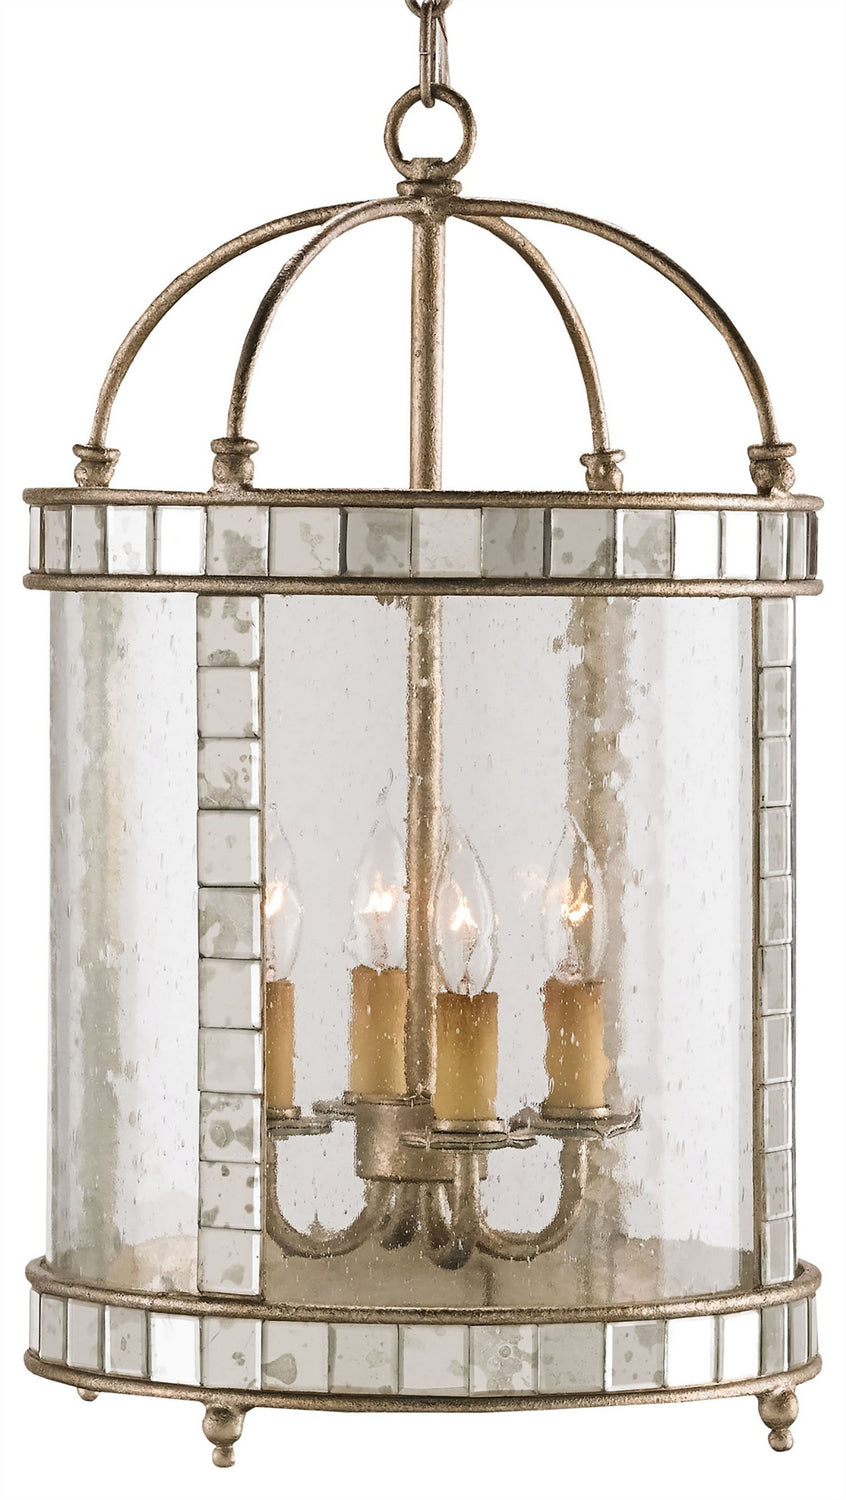 Four Light Lantern from the Corsica collection in Harlow Silver Leaf/Antique Mirror finish